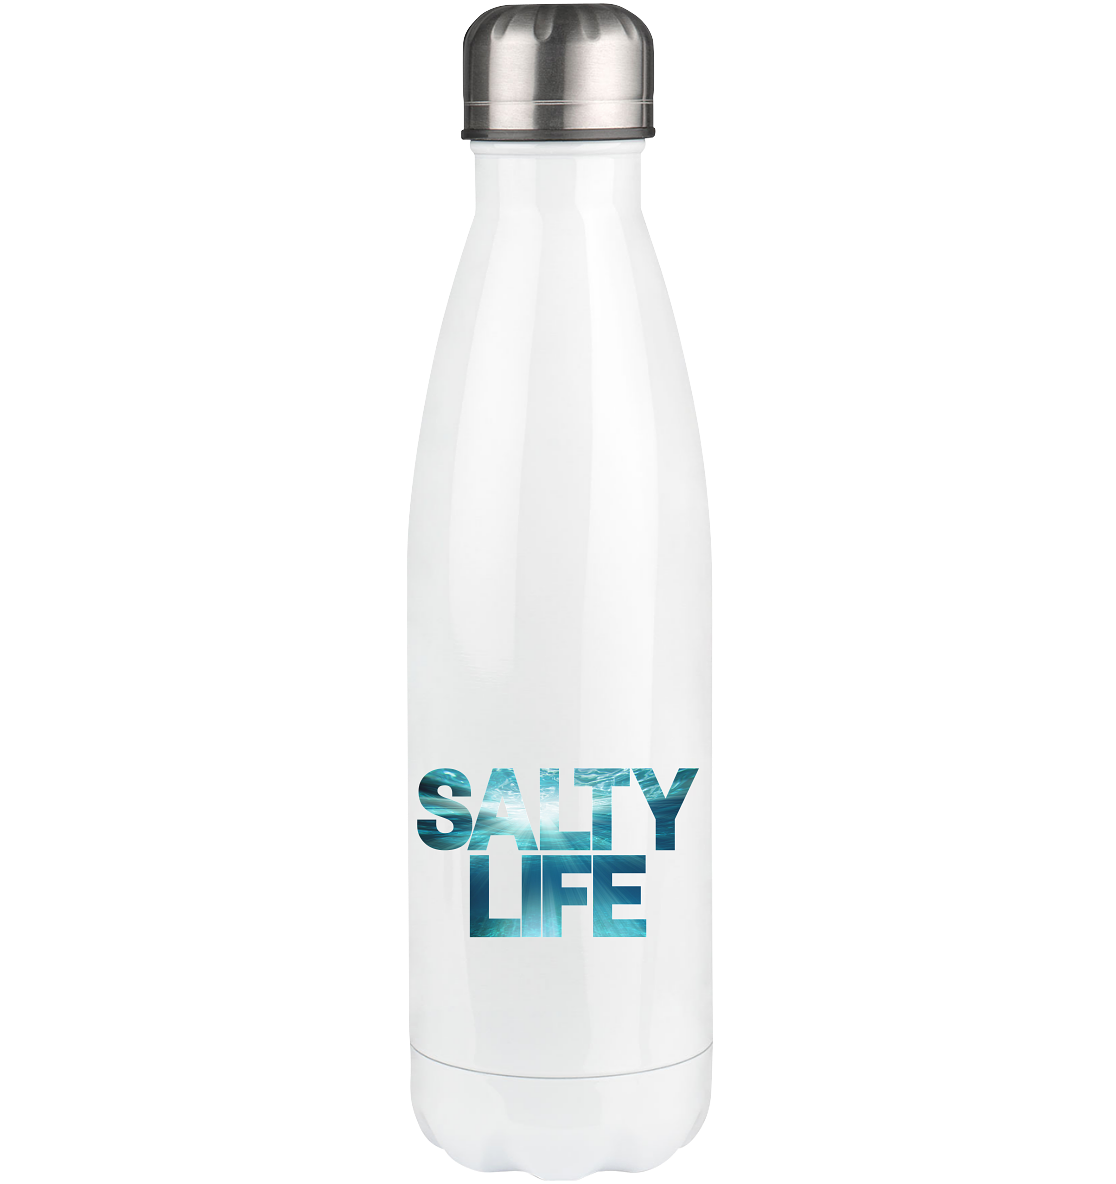 Salty Life "Lights under the sea" - Thermoflasche 500ml